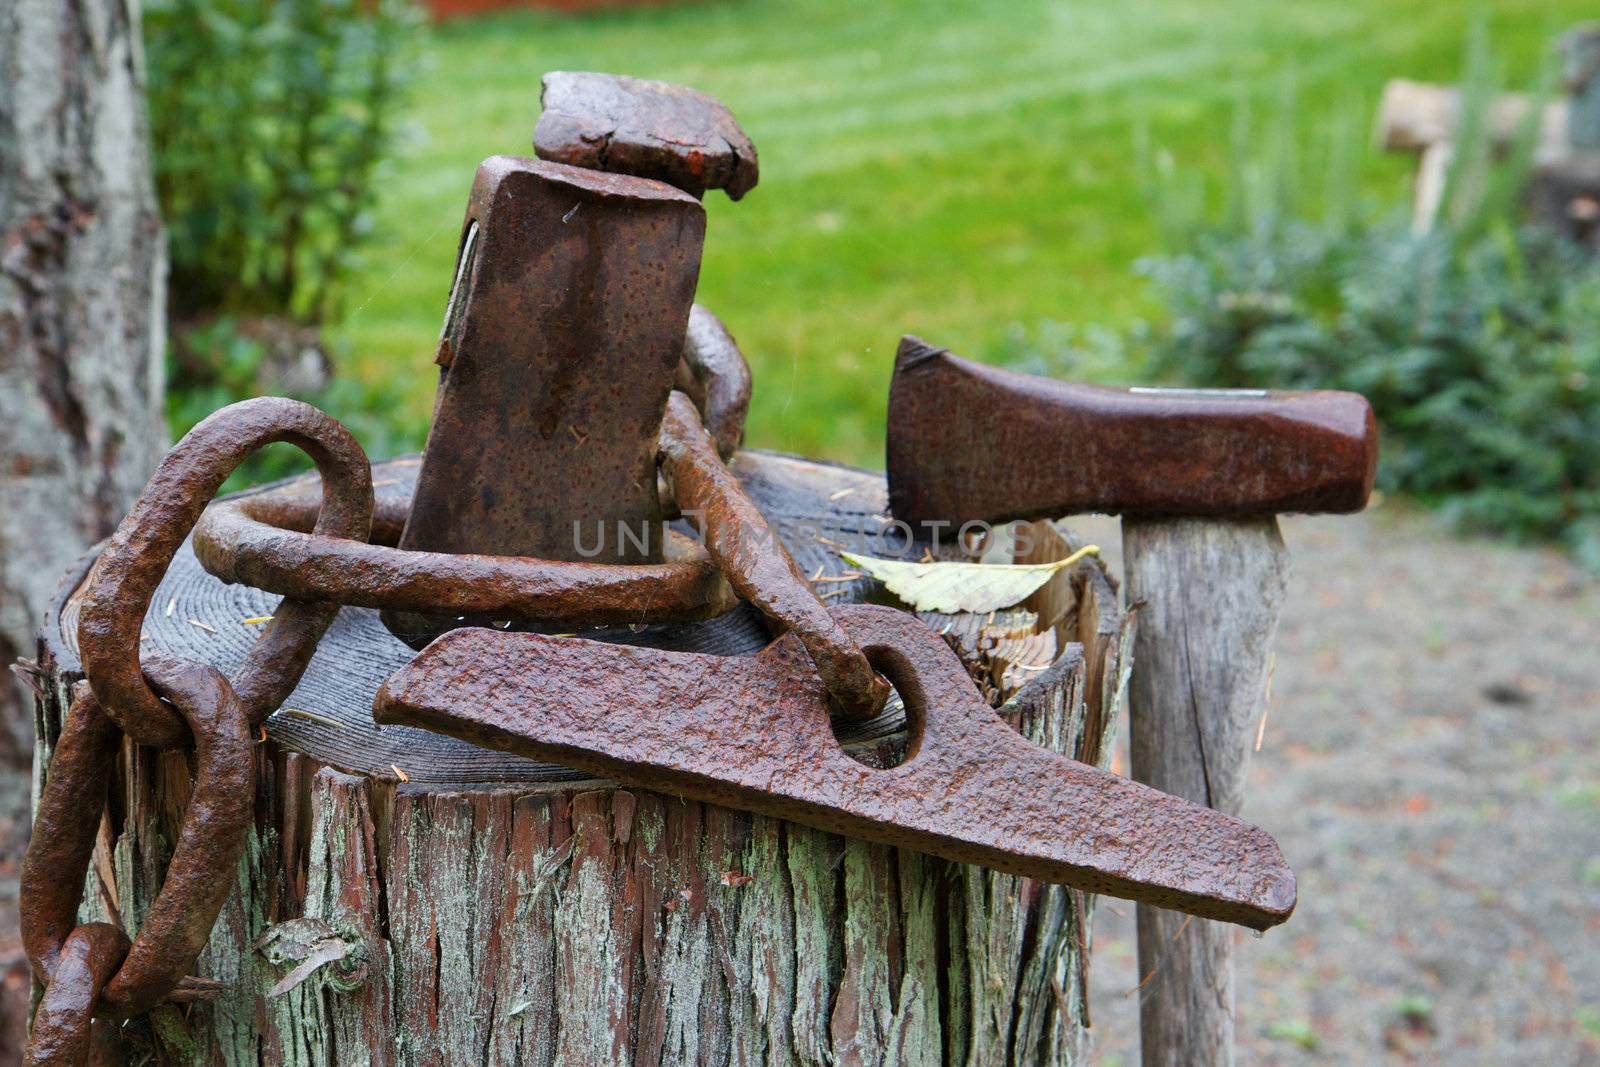 Abstract of Lumberman tools with broken rusted axe, head, chain on a stump